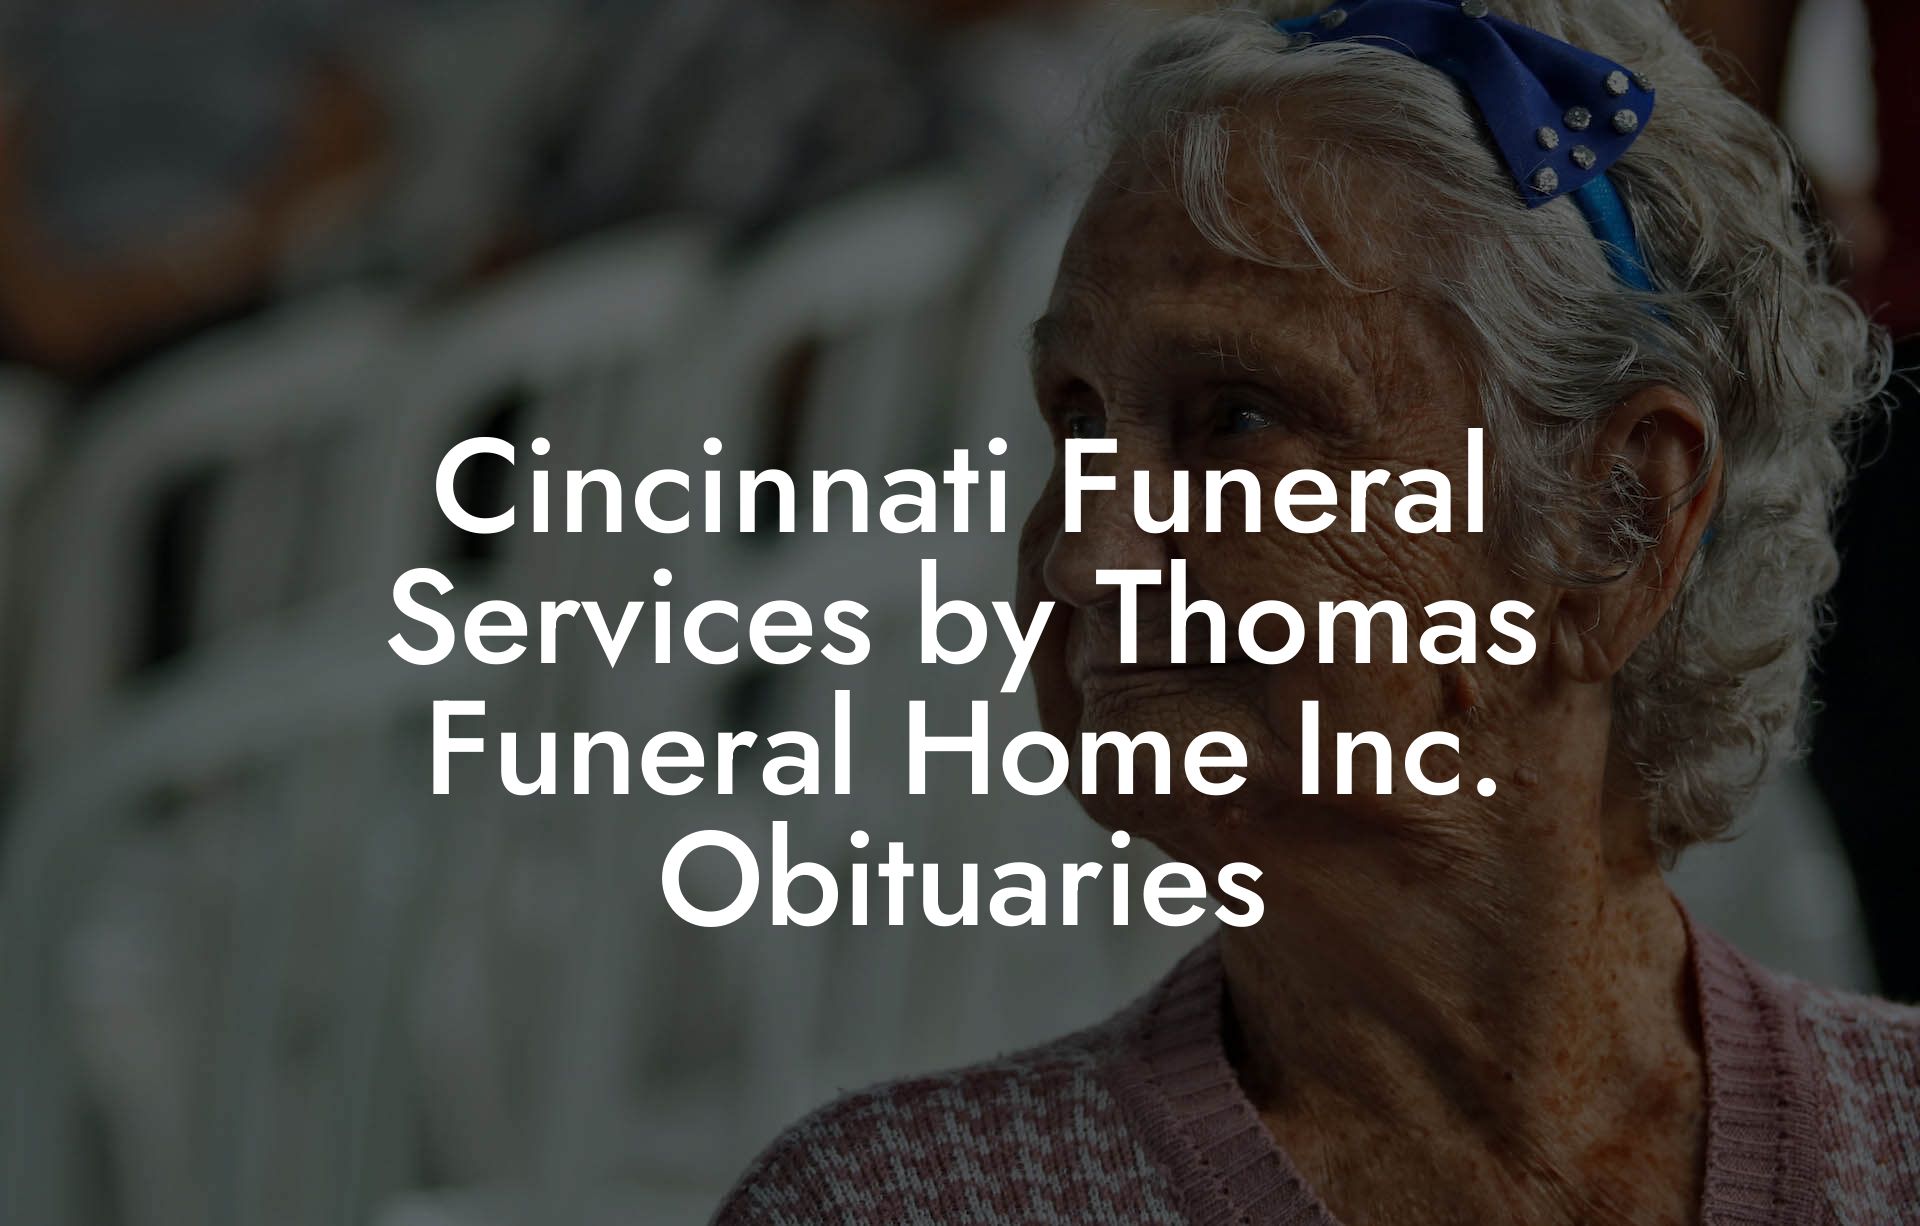 Cincinnati Funeral Services by Thomas Funeral Home Inc. Obituaries